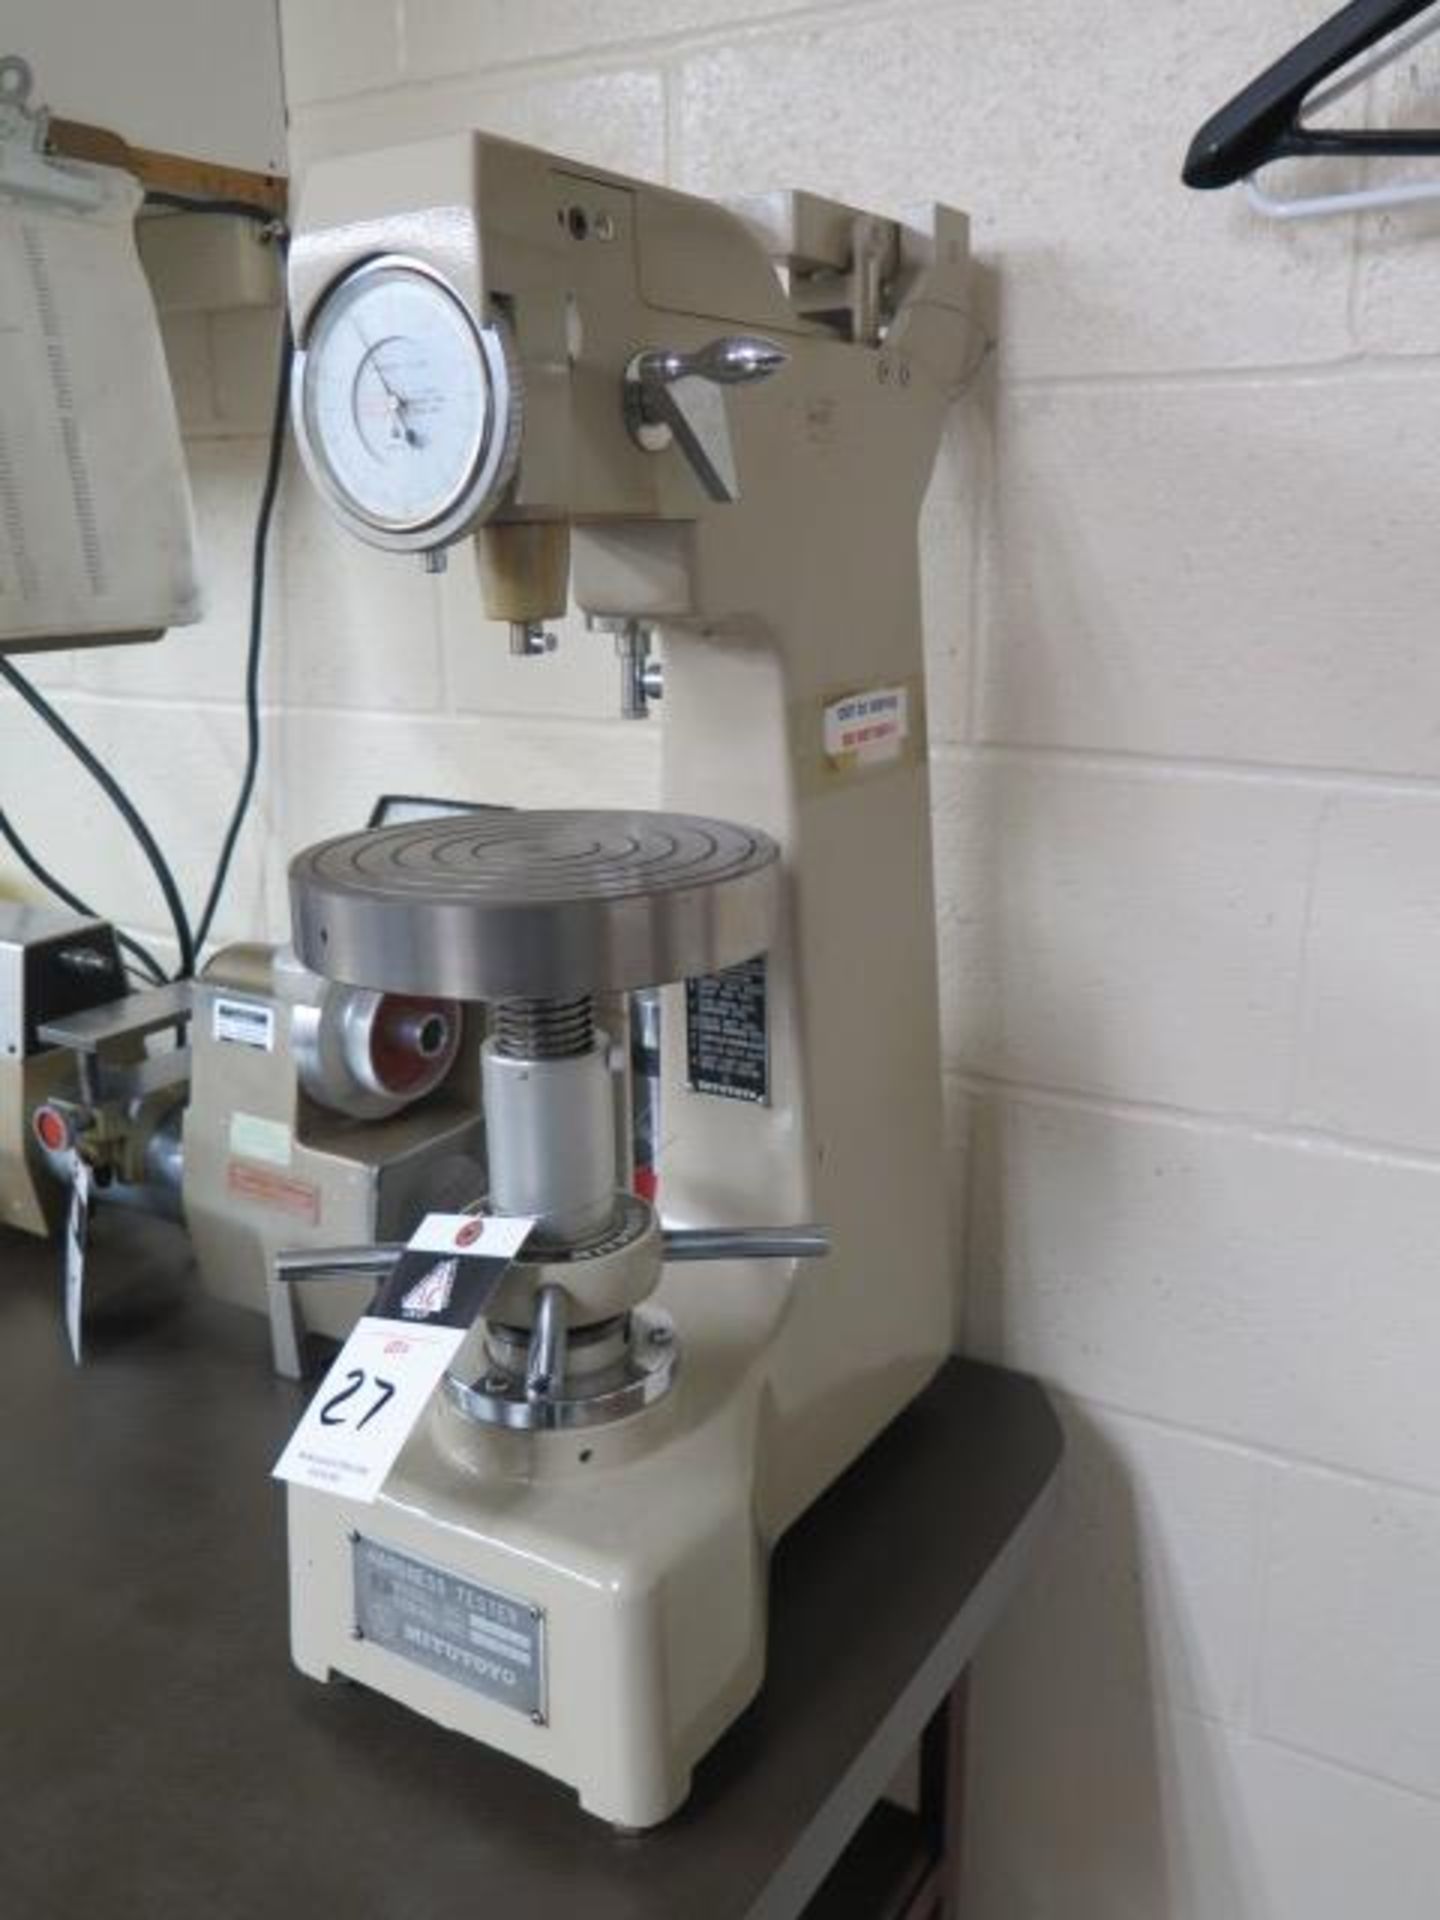 Mitutoyo mdl. 940-130 Rockwell Hardness Tester (SOLD AS-IS - NO WARRANTY) - Image 2 of 18